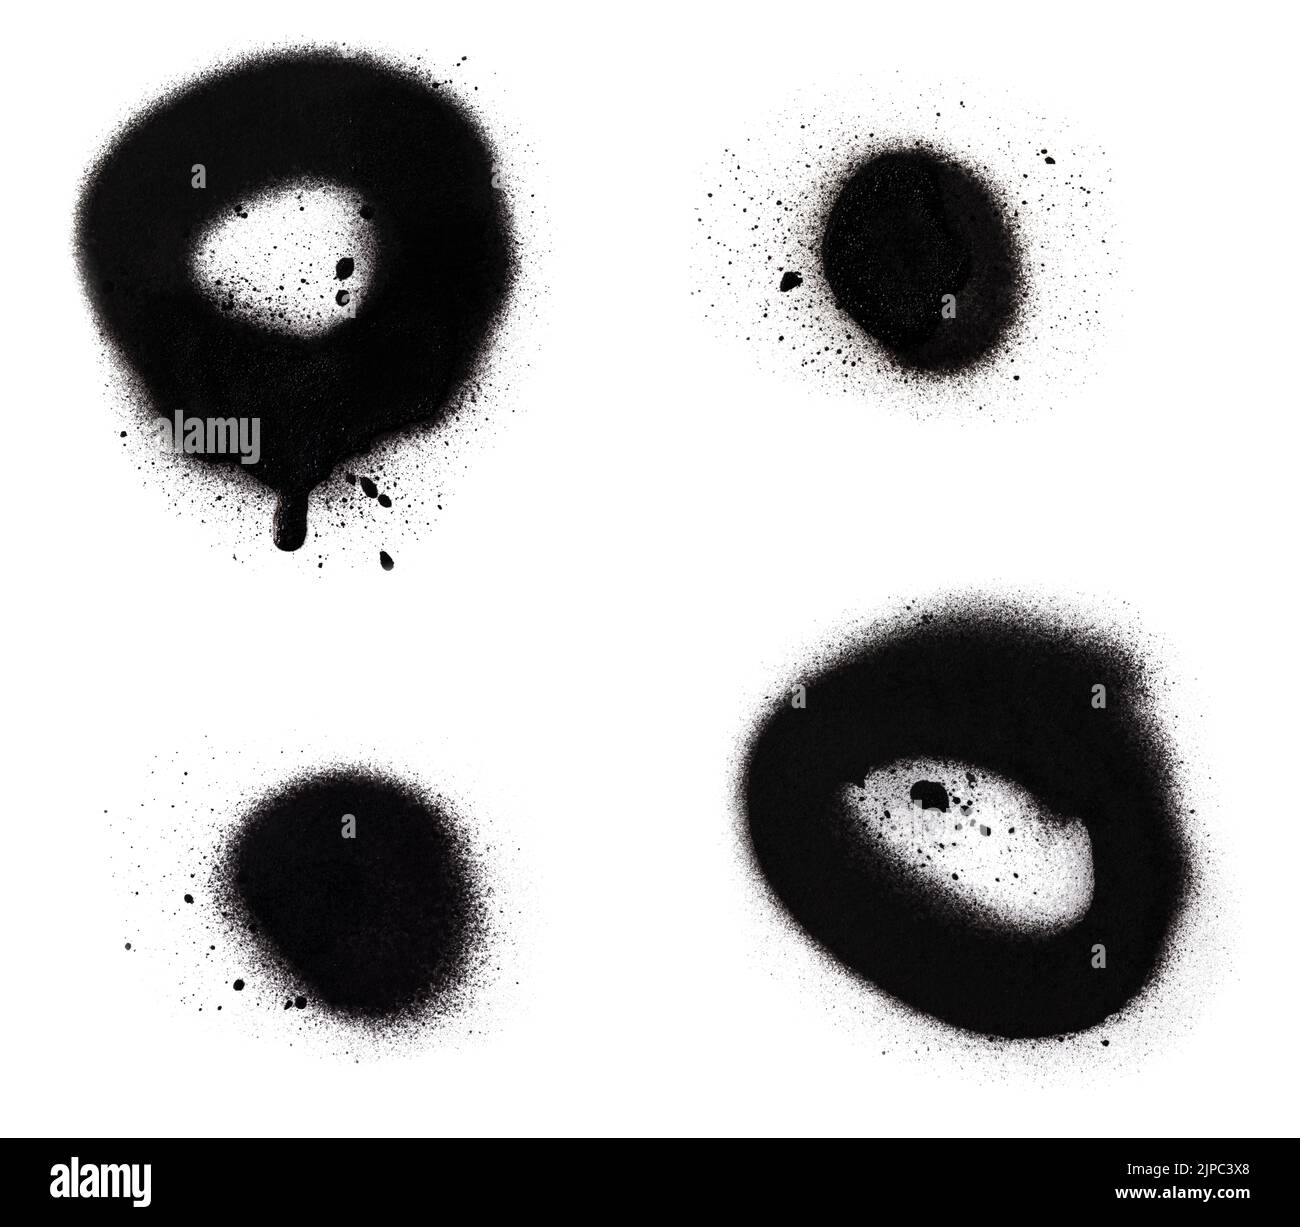 Close-up of two black spray paint spots and circles with splashes and drips, isolated on white background. Stock Photo